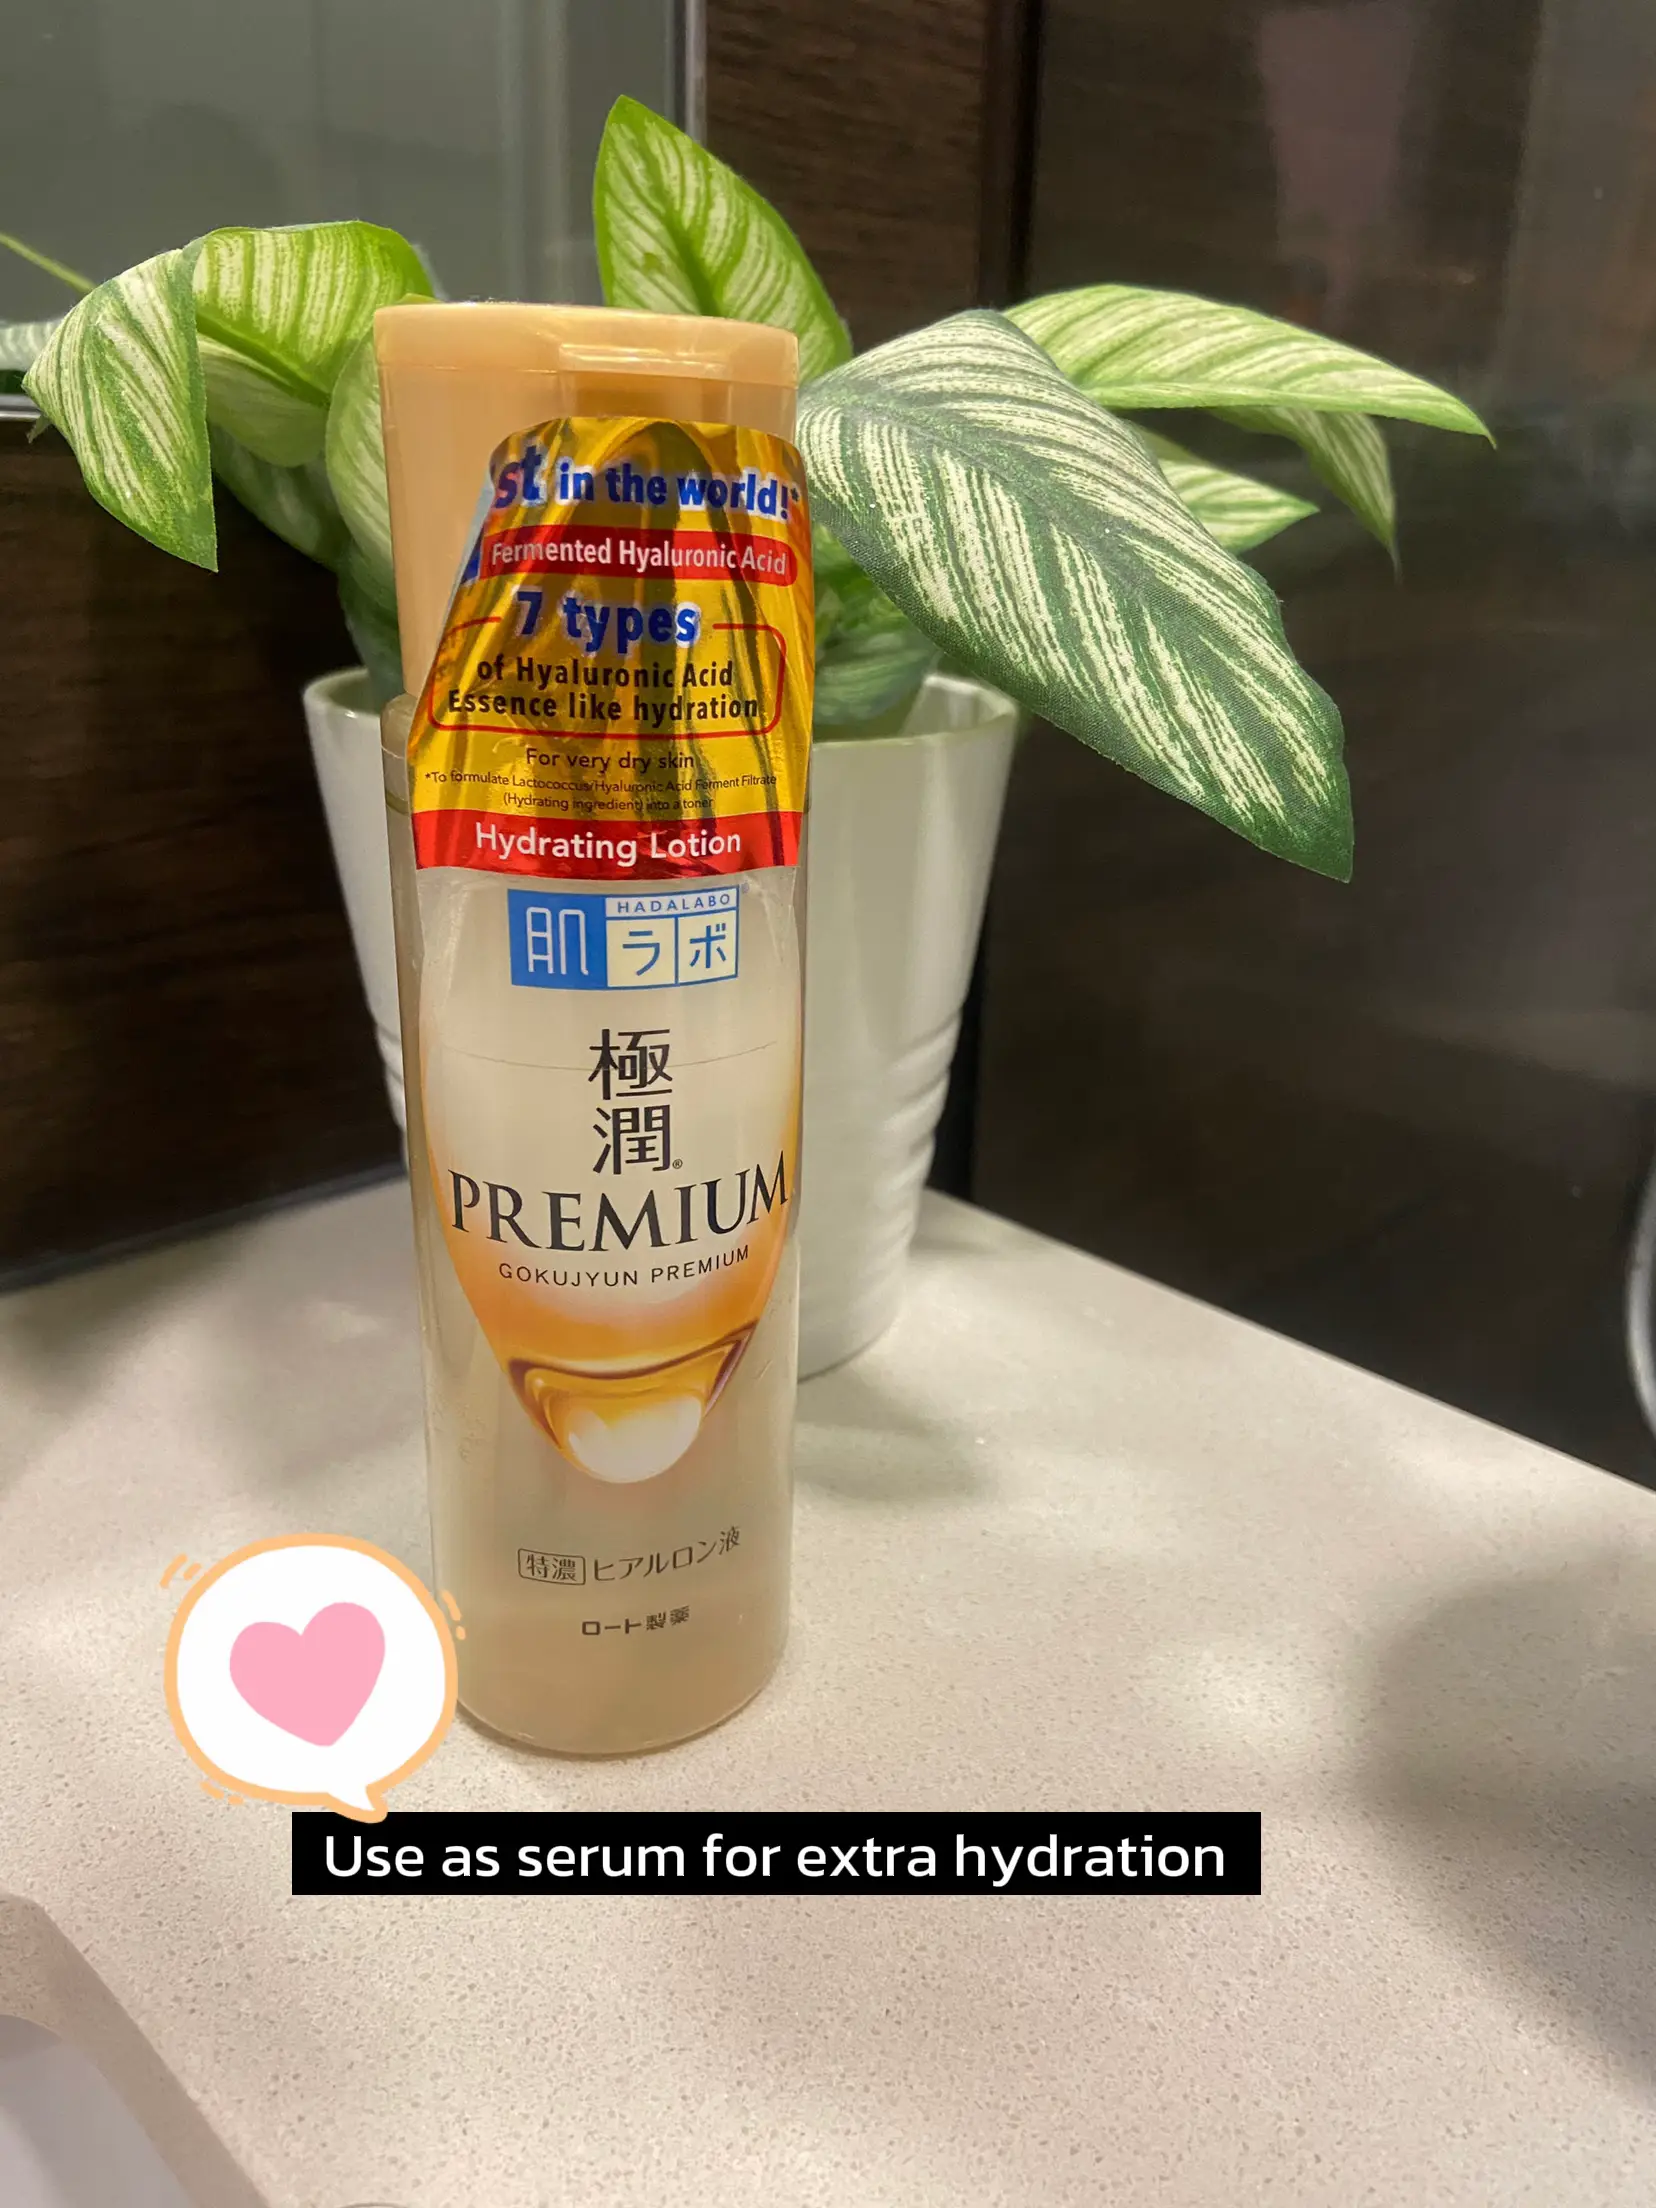 Top moisturers for SG weather 🥰😩's images(2)